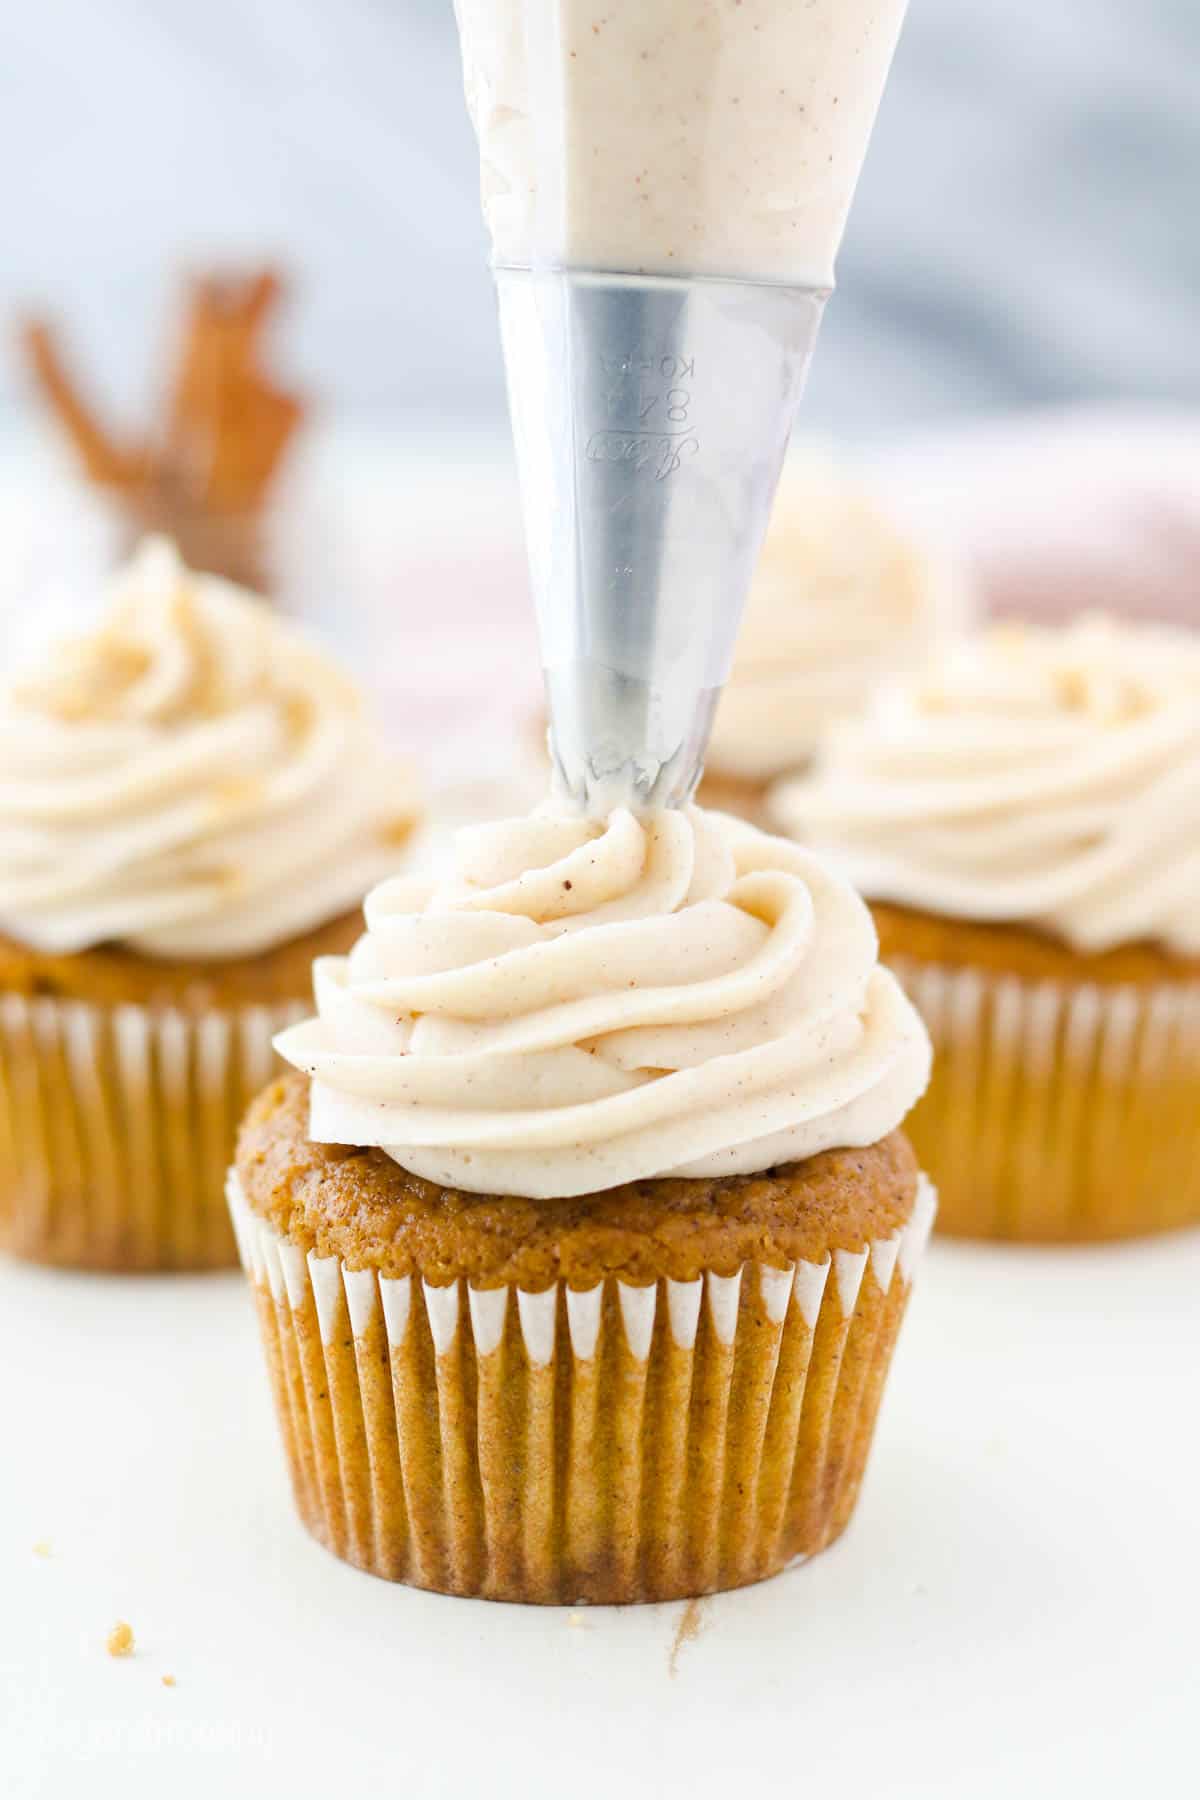 Cream cheese frosting piped onto a pumpkin cupcake